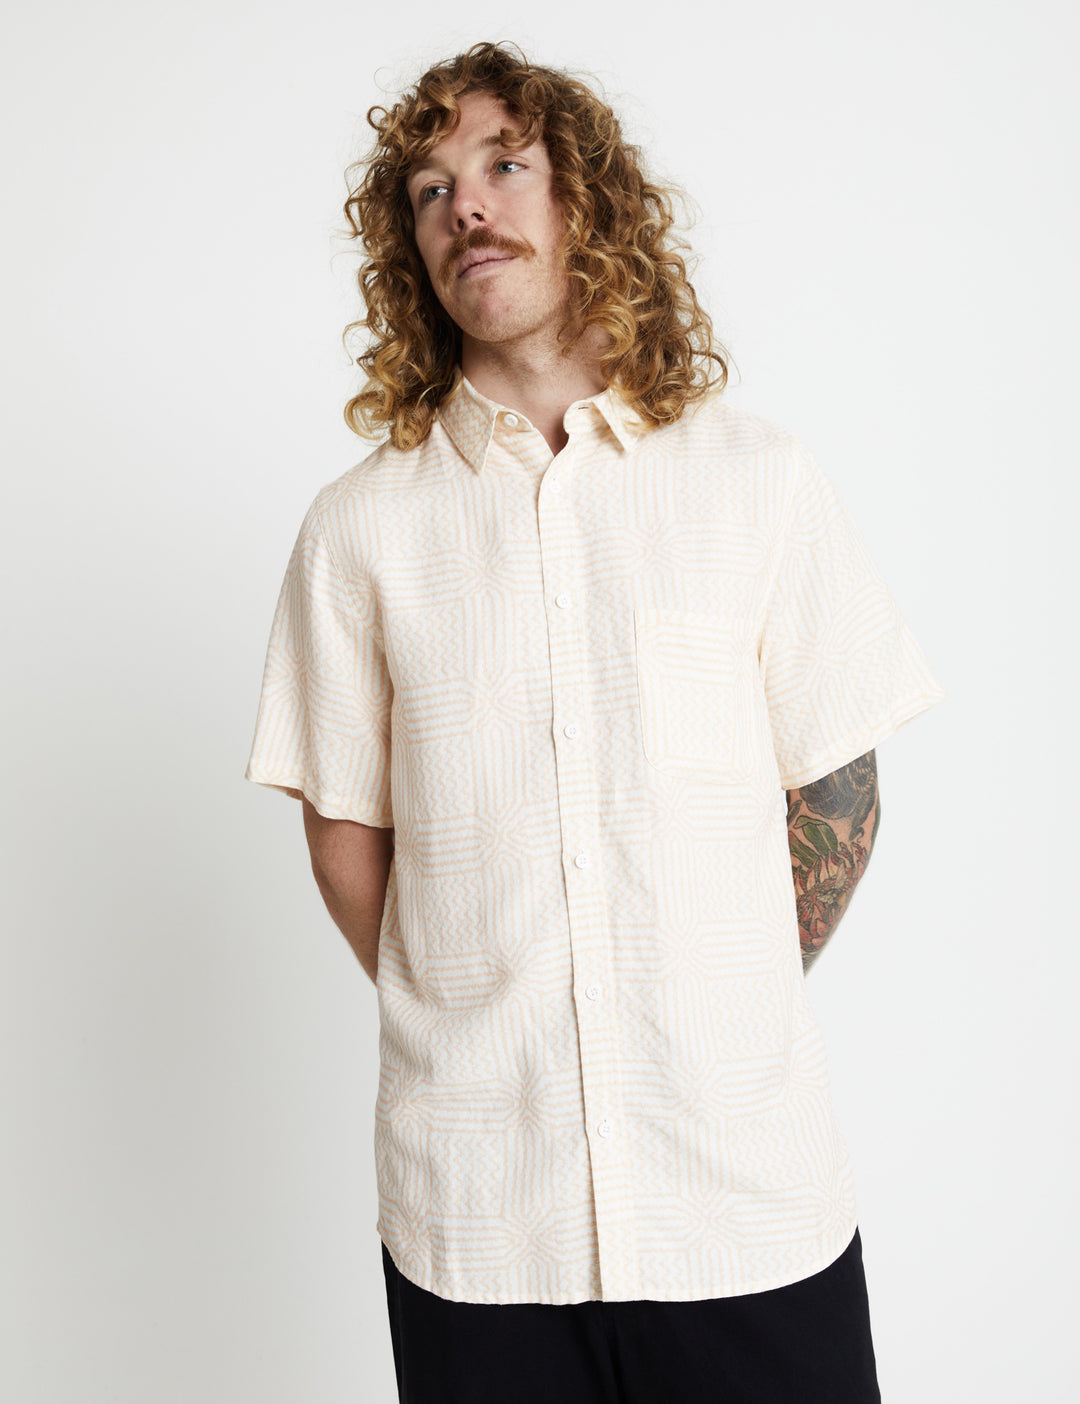 Mr Simple - Casbah BBQ Shirt in Salmon | Buster McGee